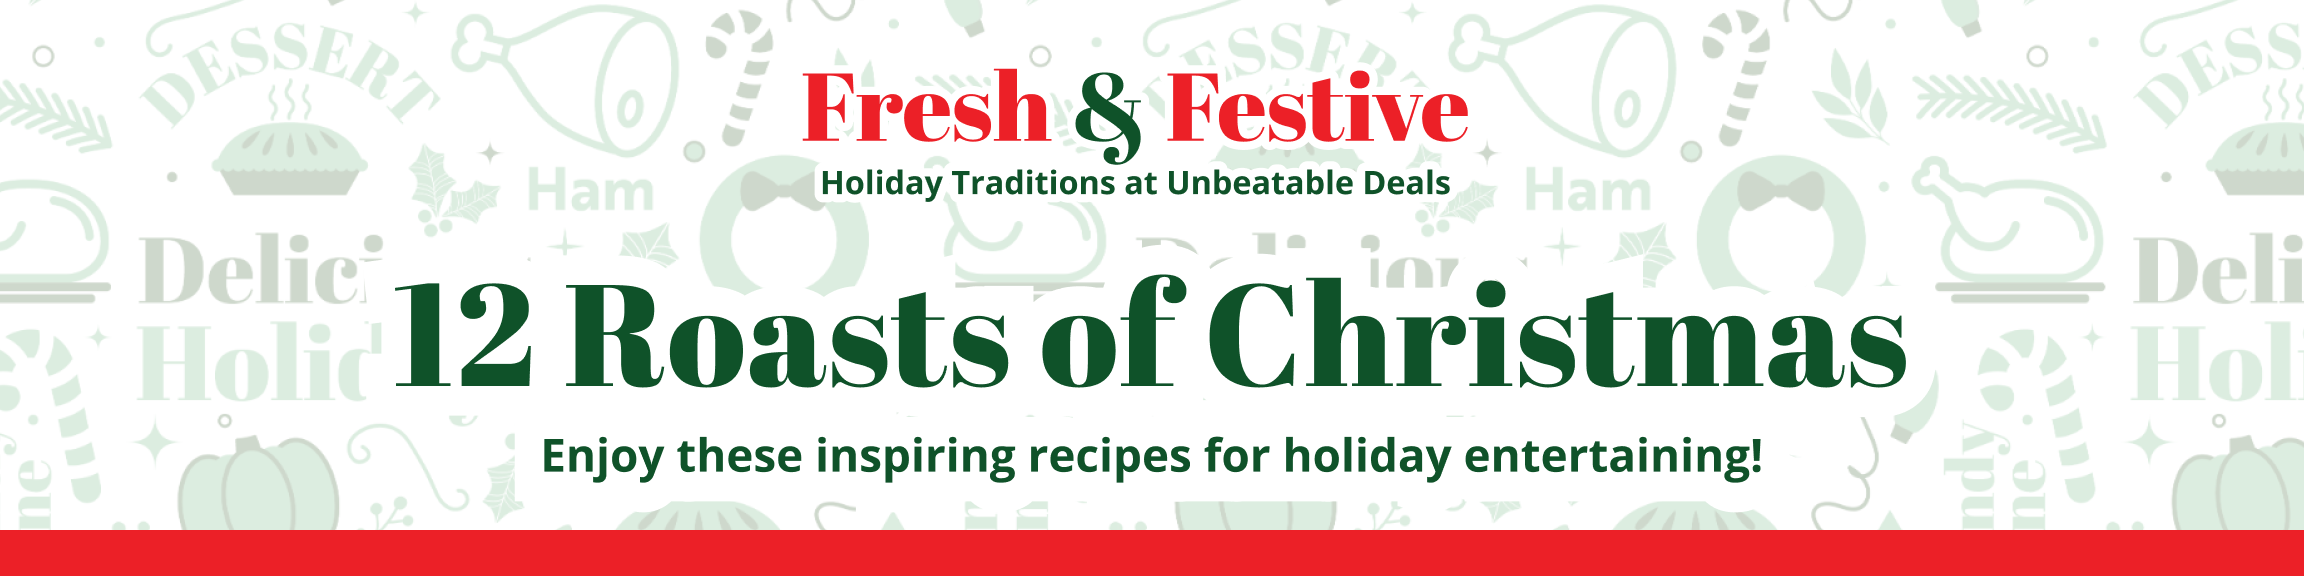 12 Roasts of Christmas Banner: Fresh & Festive - Holiday Traditions at Unbeatable Deals logo at the center top behind a holiday wallpaper. Enjoy these inspiring recipes for holiday entertaining!